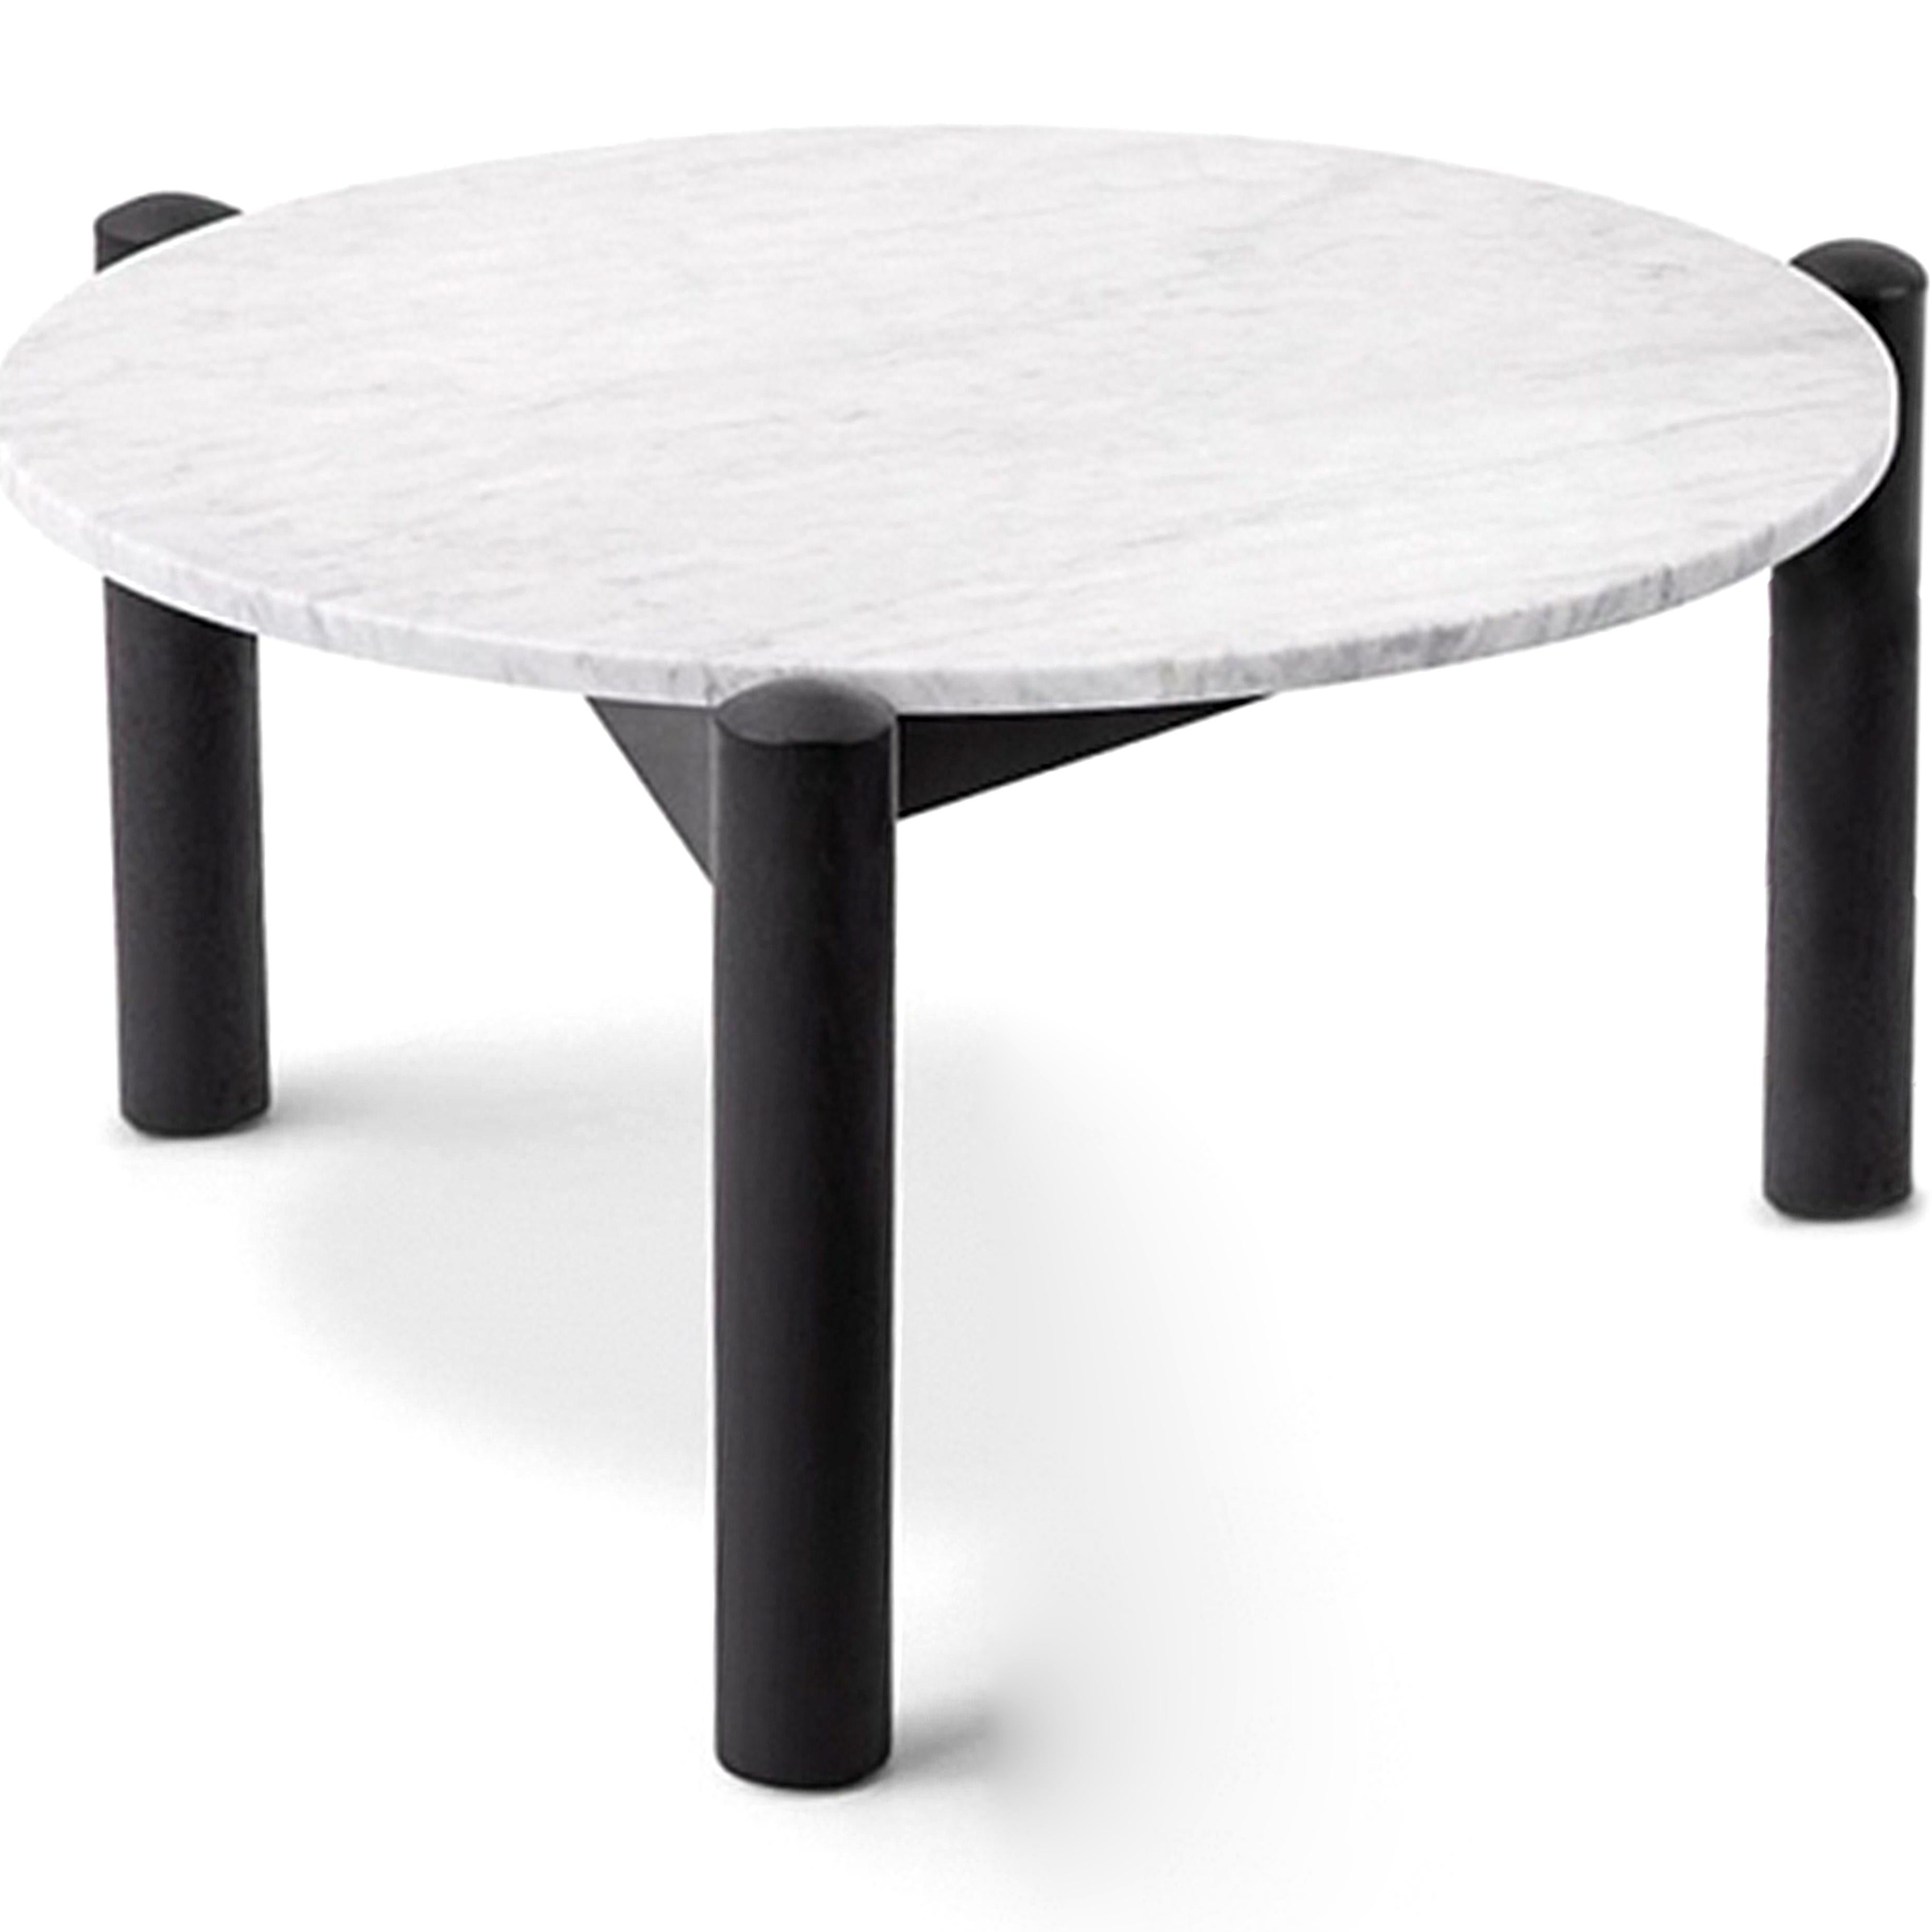 Italian Table À Plateau Interchangeable, by Charlotte Perriand for Cassina For Sale